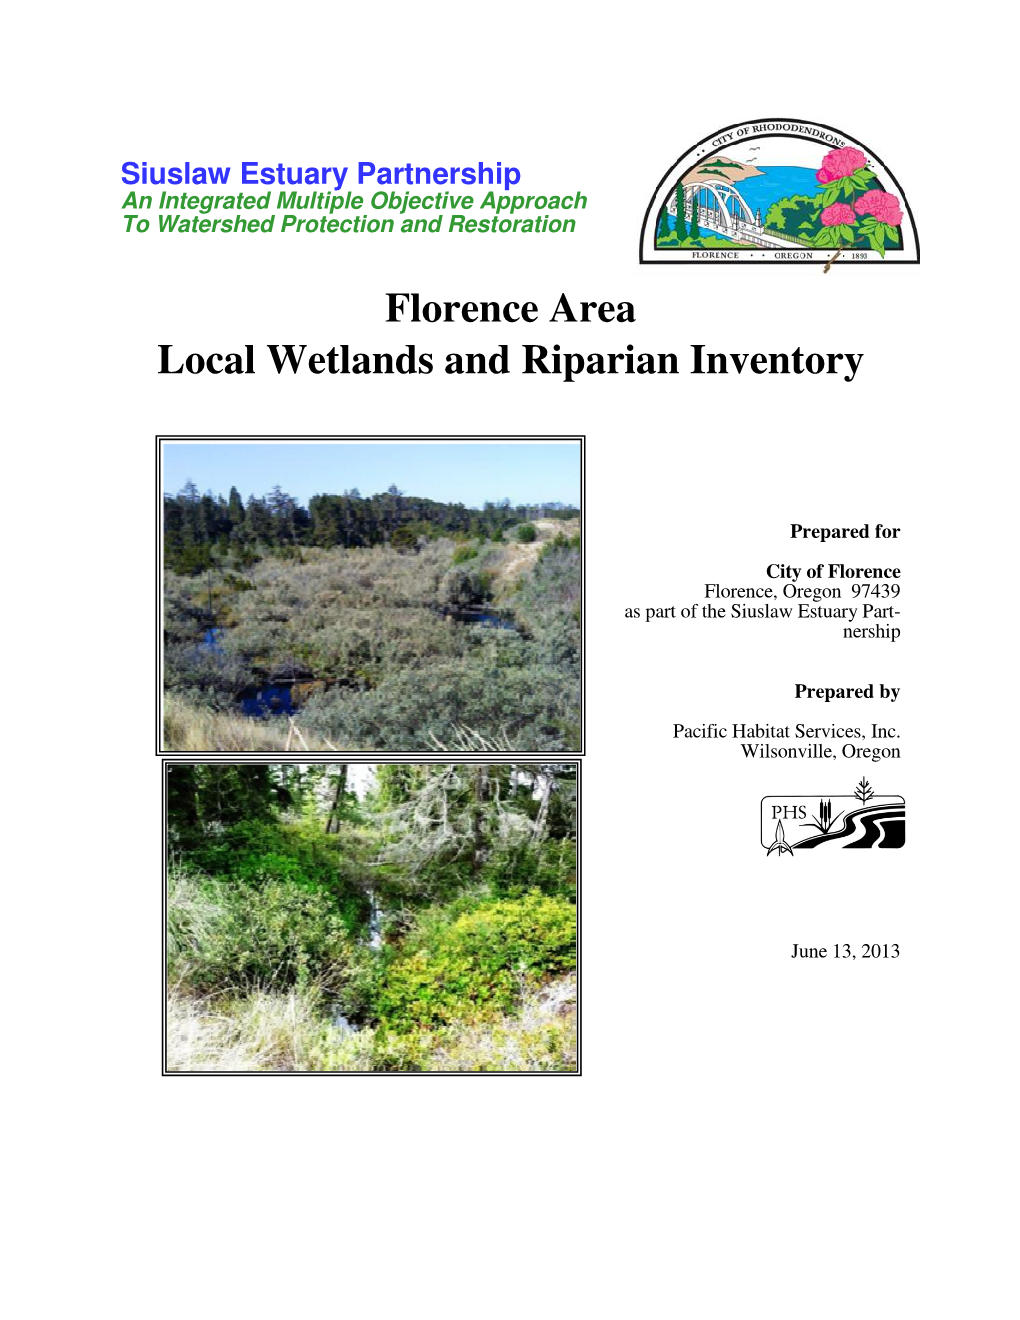 Local Wetland and Riparian Inventory